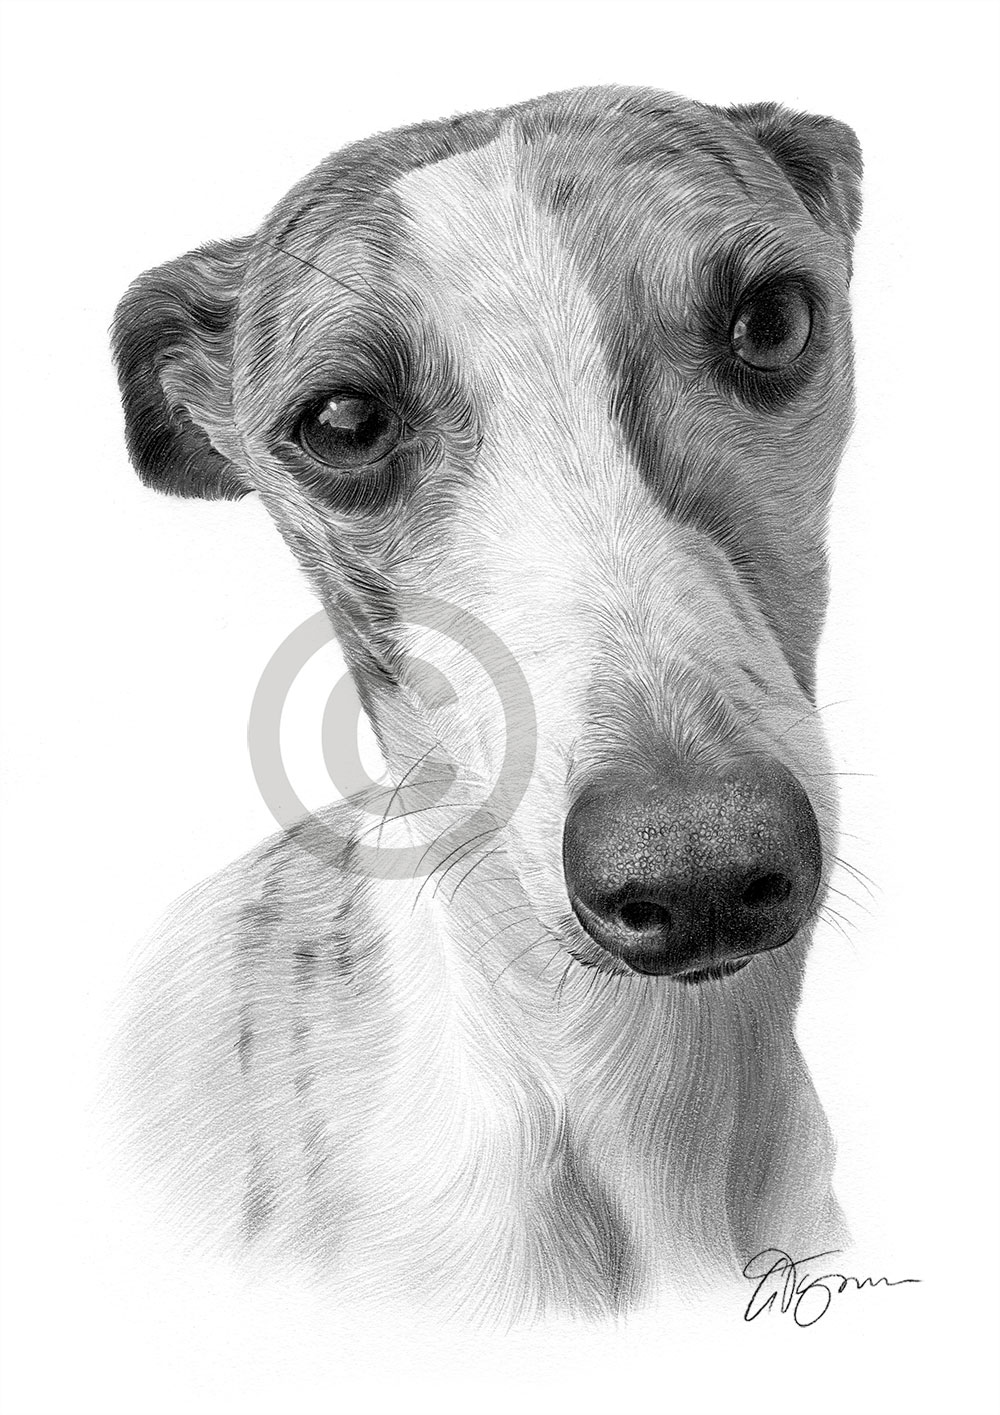 Pencil drawing of an adult Whippet by artist Gary Tymon